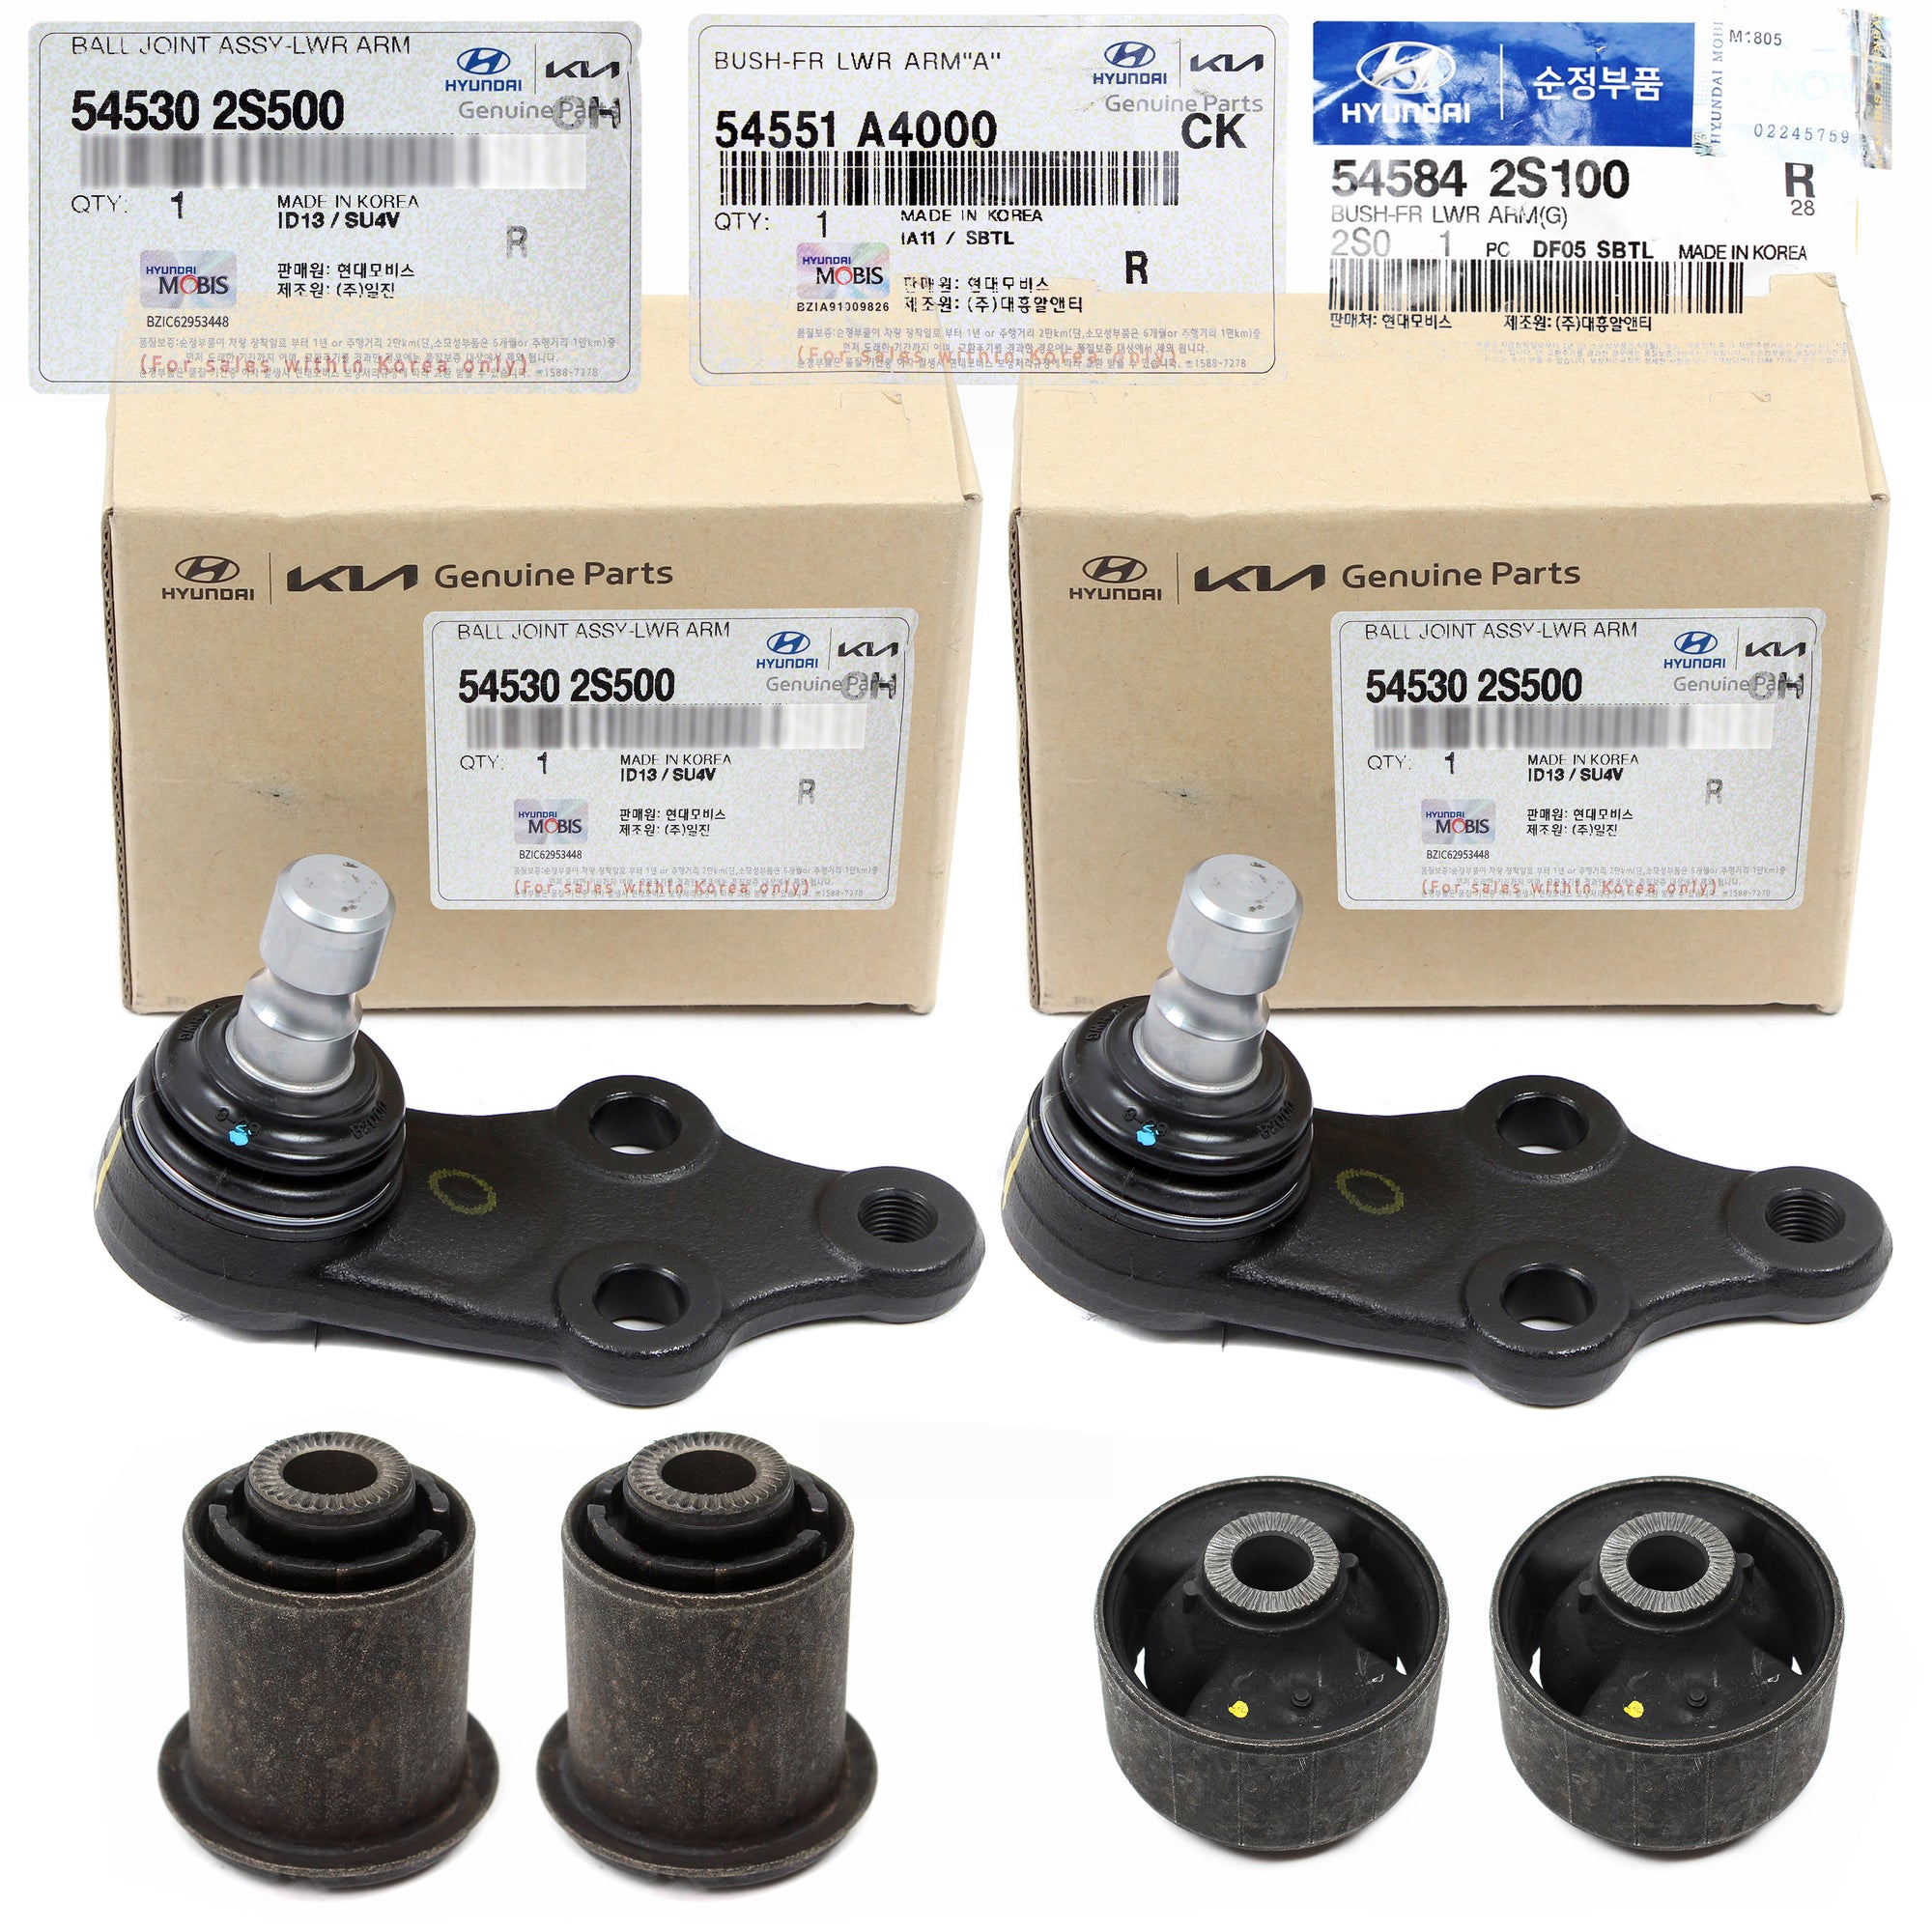 GENUINE 2X Lower Ball Joints & Bushings for 14-16 Tucson Sportage 545302S500